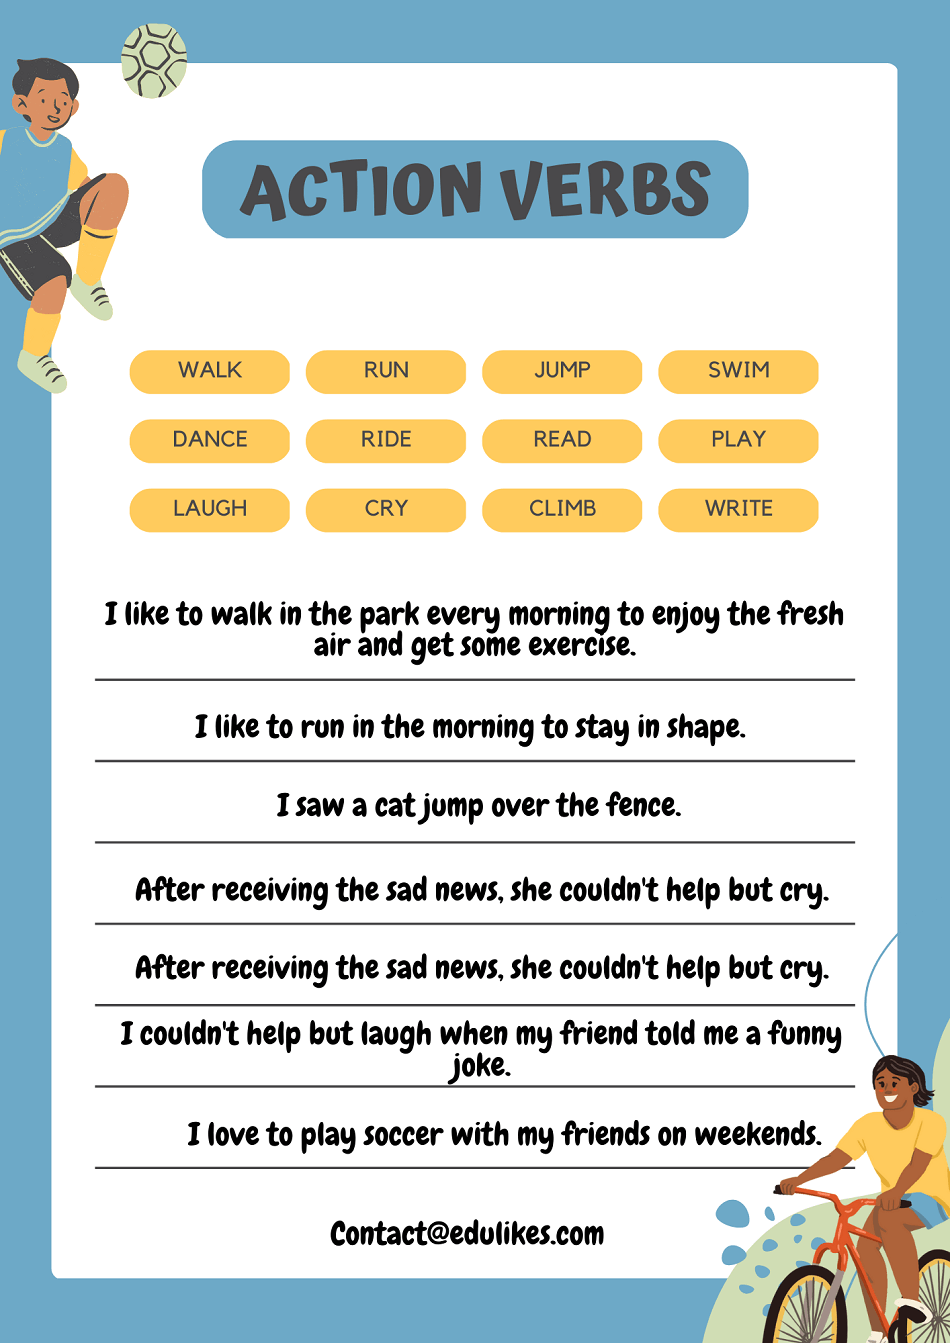 Action verb